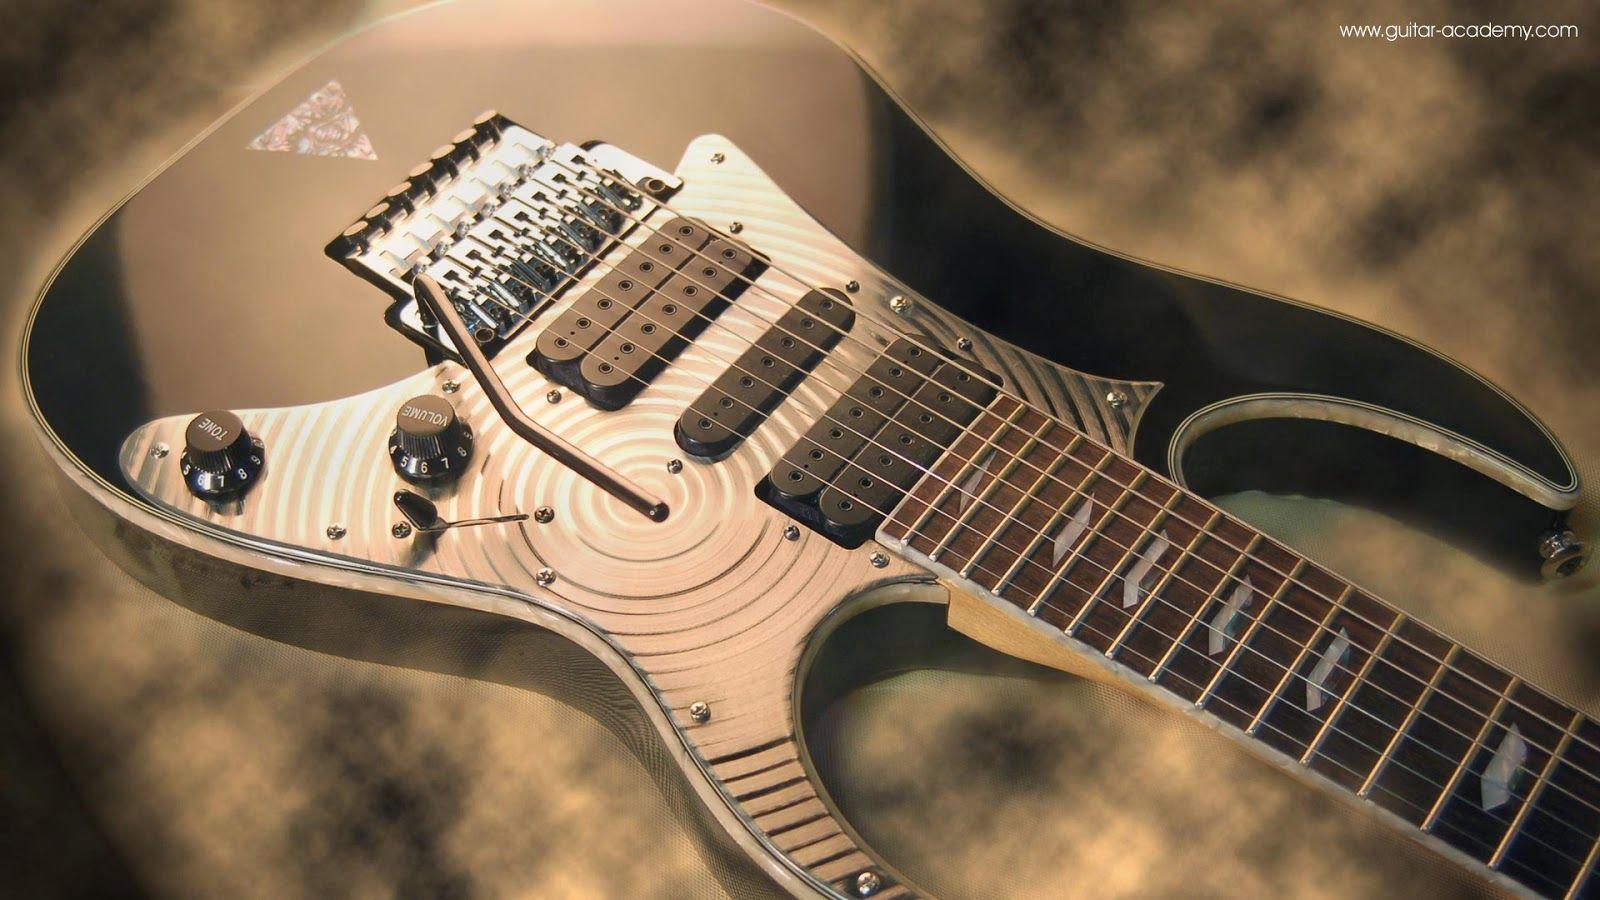 guitar series D and CG Abstract Background Wallpaper on 1600x900